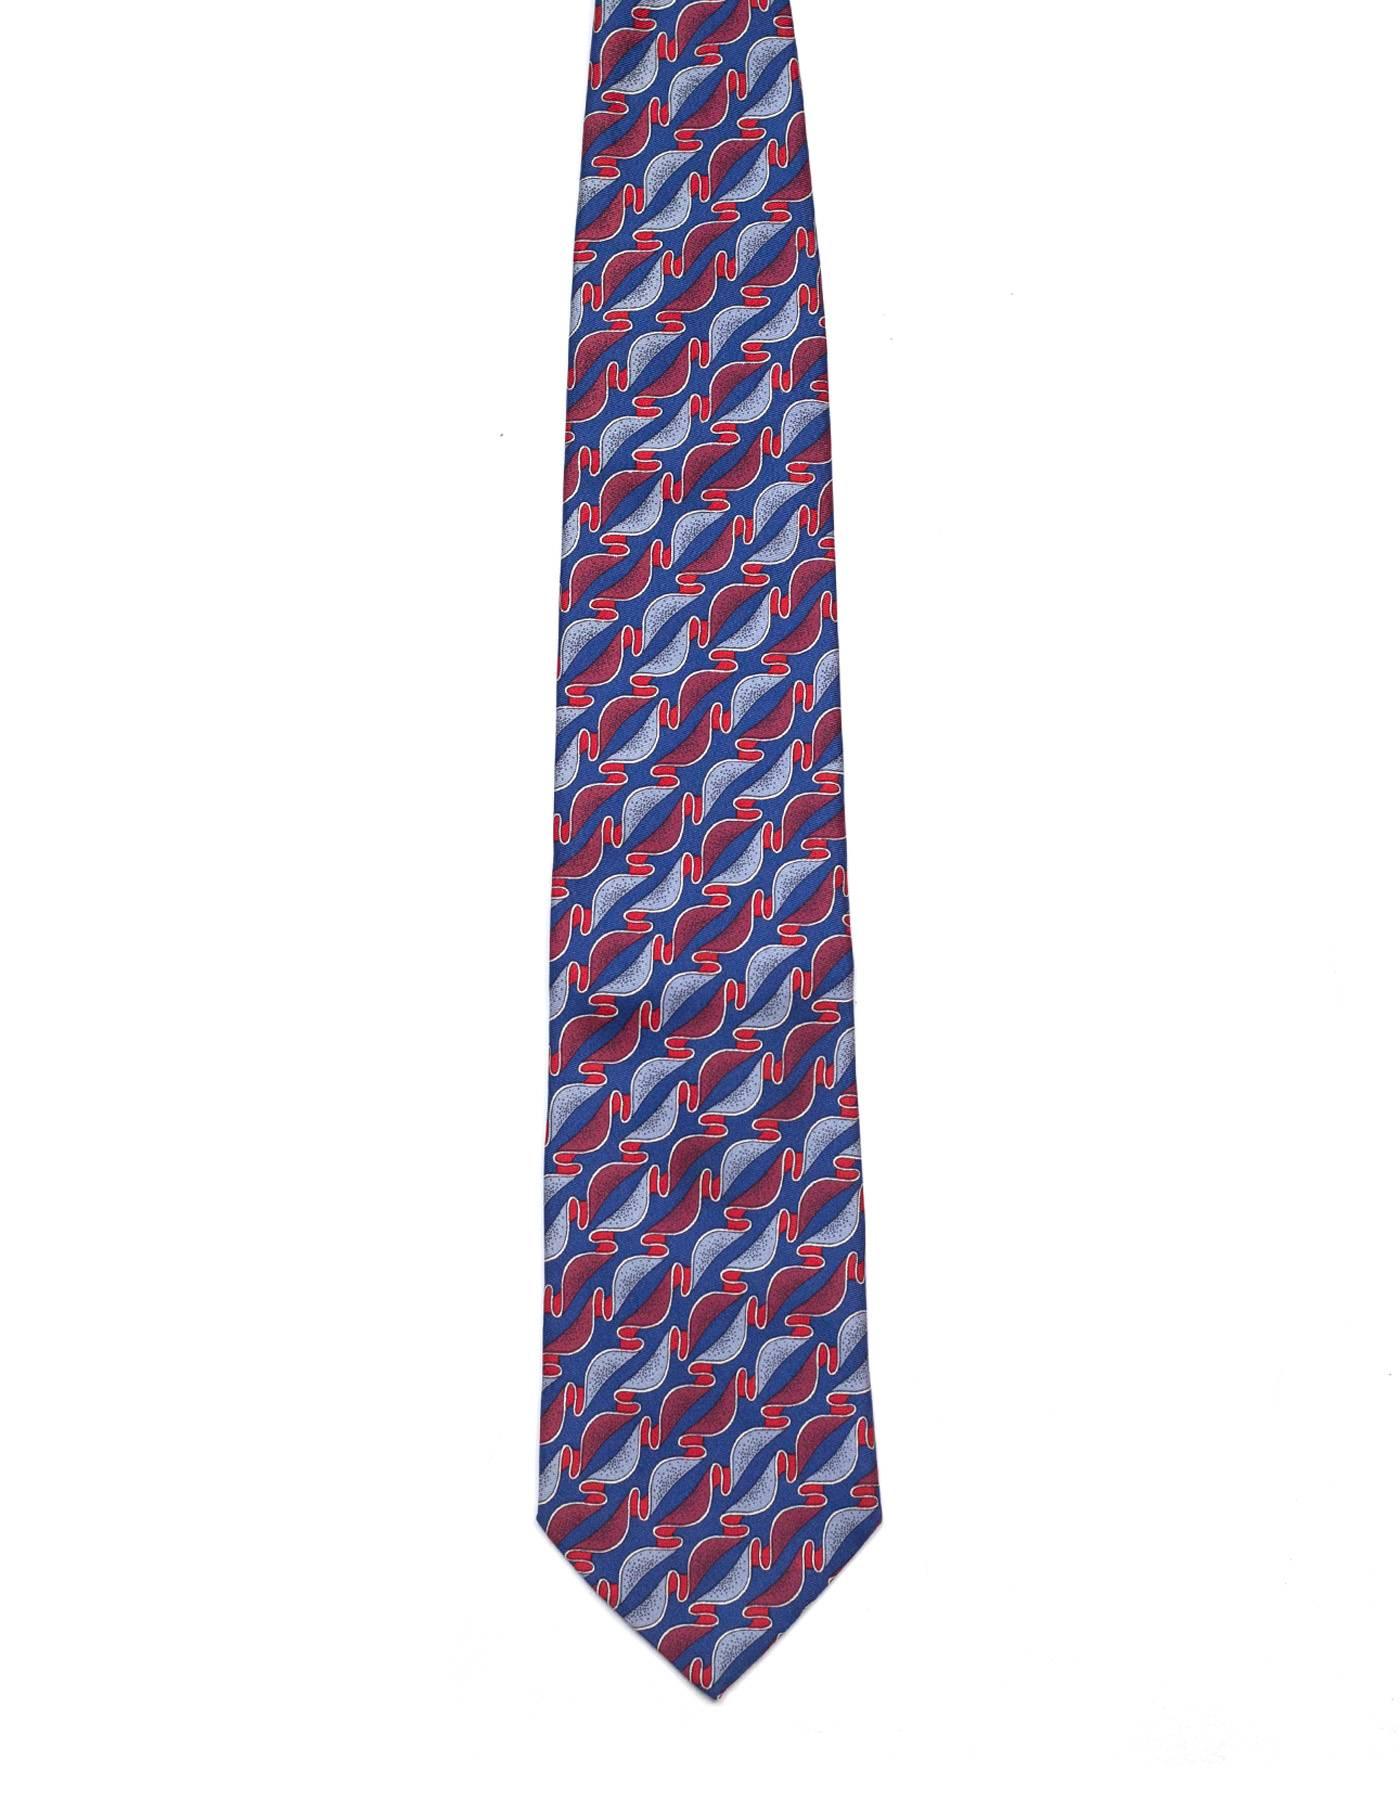 Bottega Veneta Blue & Red Printed Silk Tie
Features ribbon printed throughout

Made In: Italy
Color: Red and blue
Composition: 100% silk
Overall Condition: Excellent pre-owned condition
Measurements: 
Length: 55.5"
Width: